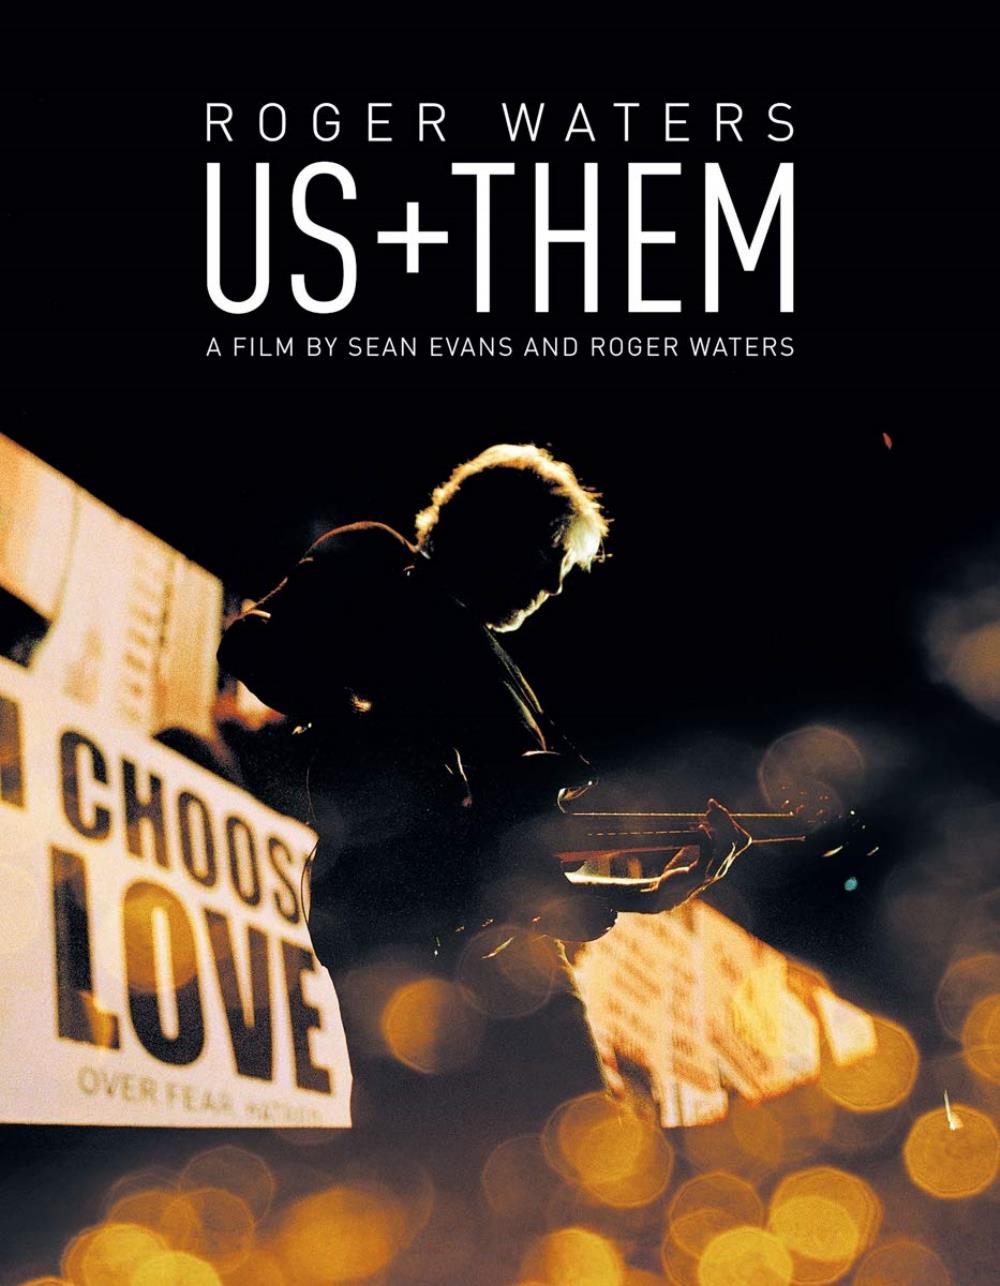 Roger Waters - Us + Them CD (album) cover